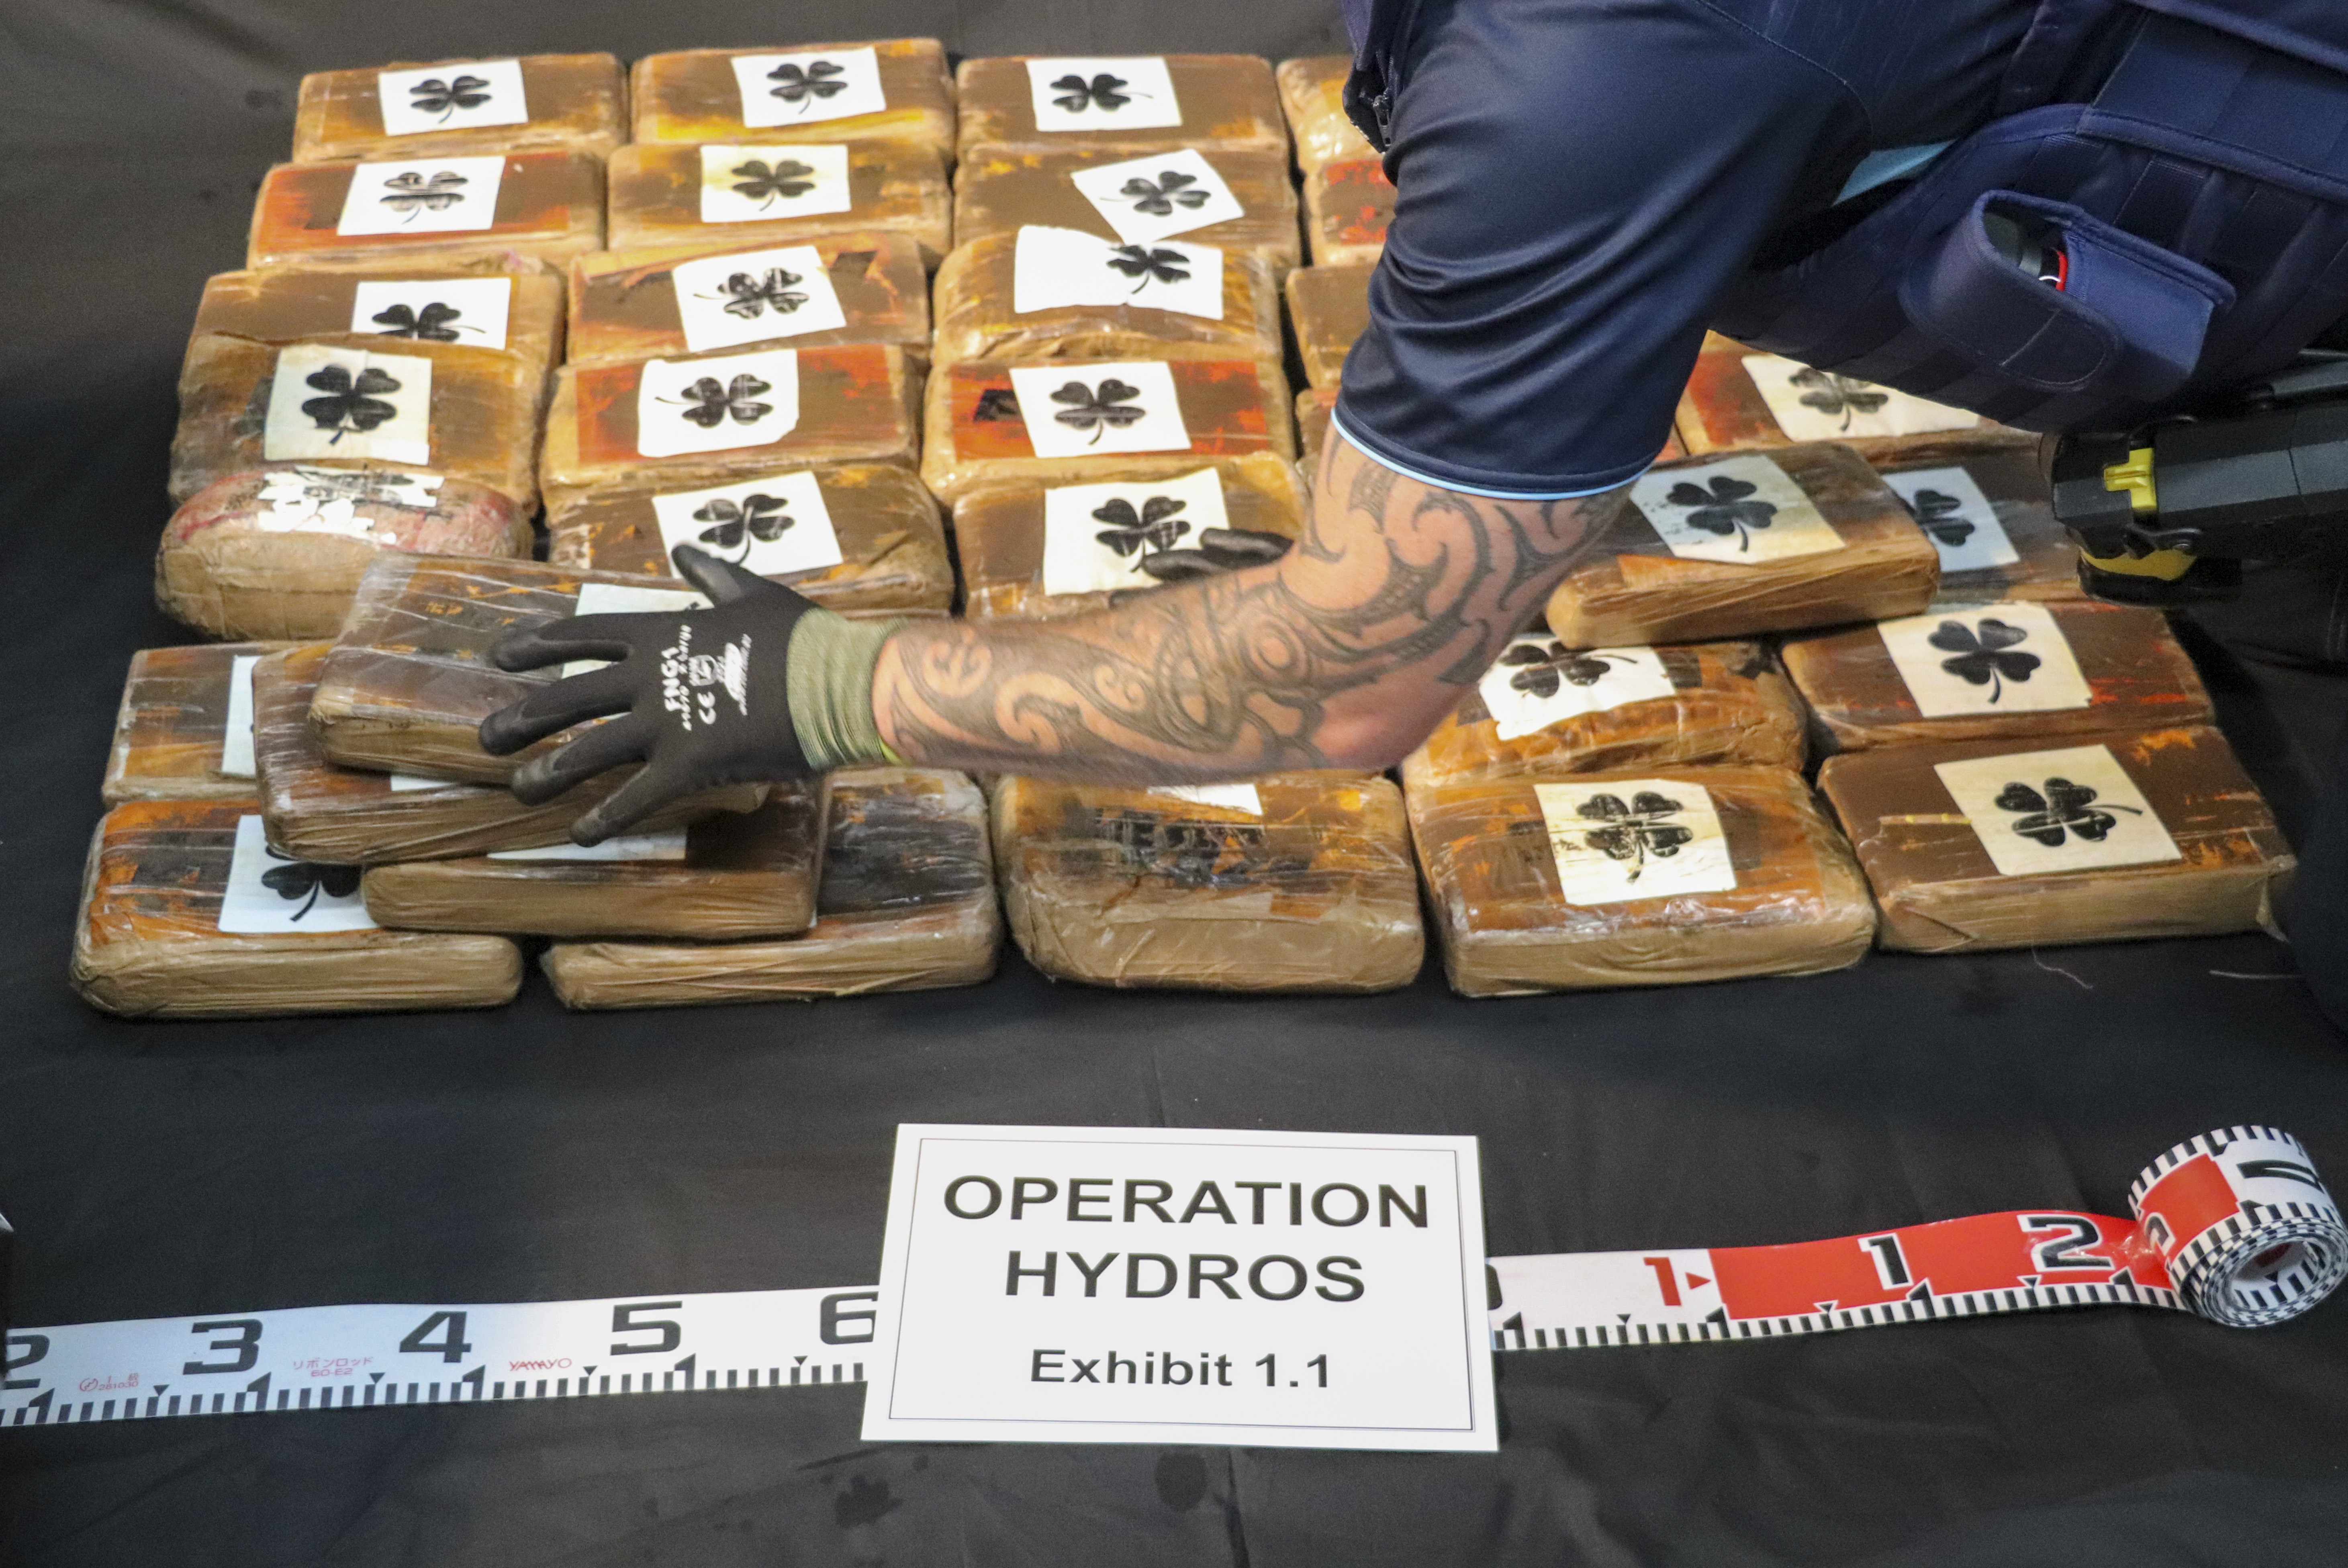 Over $300 million worth of cocaine was seized by New Zealand authorities af...